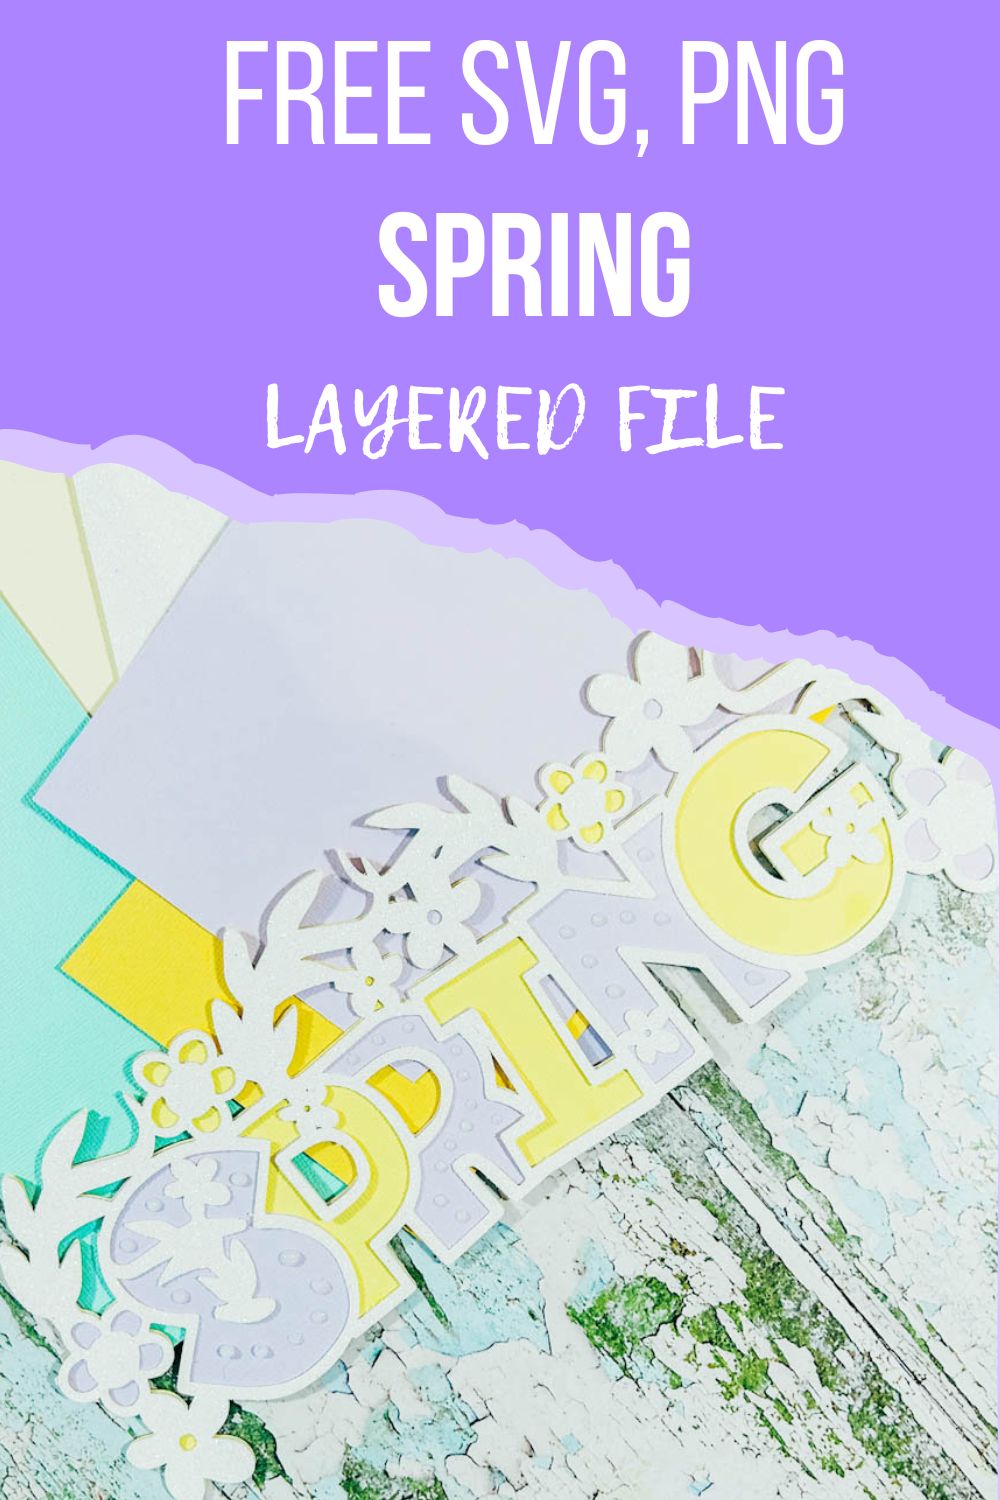 Free SVG, PNG Spring layered File For Cricut and Silhouette